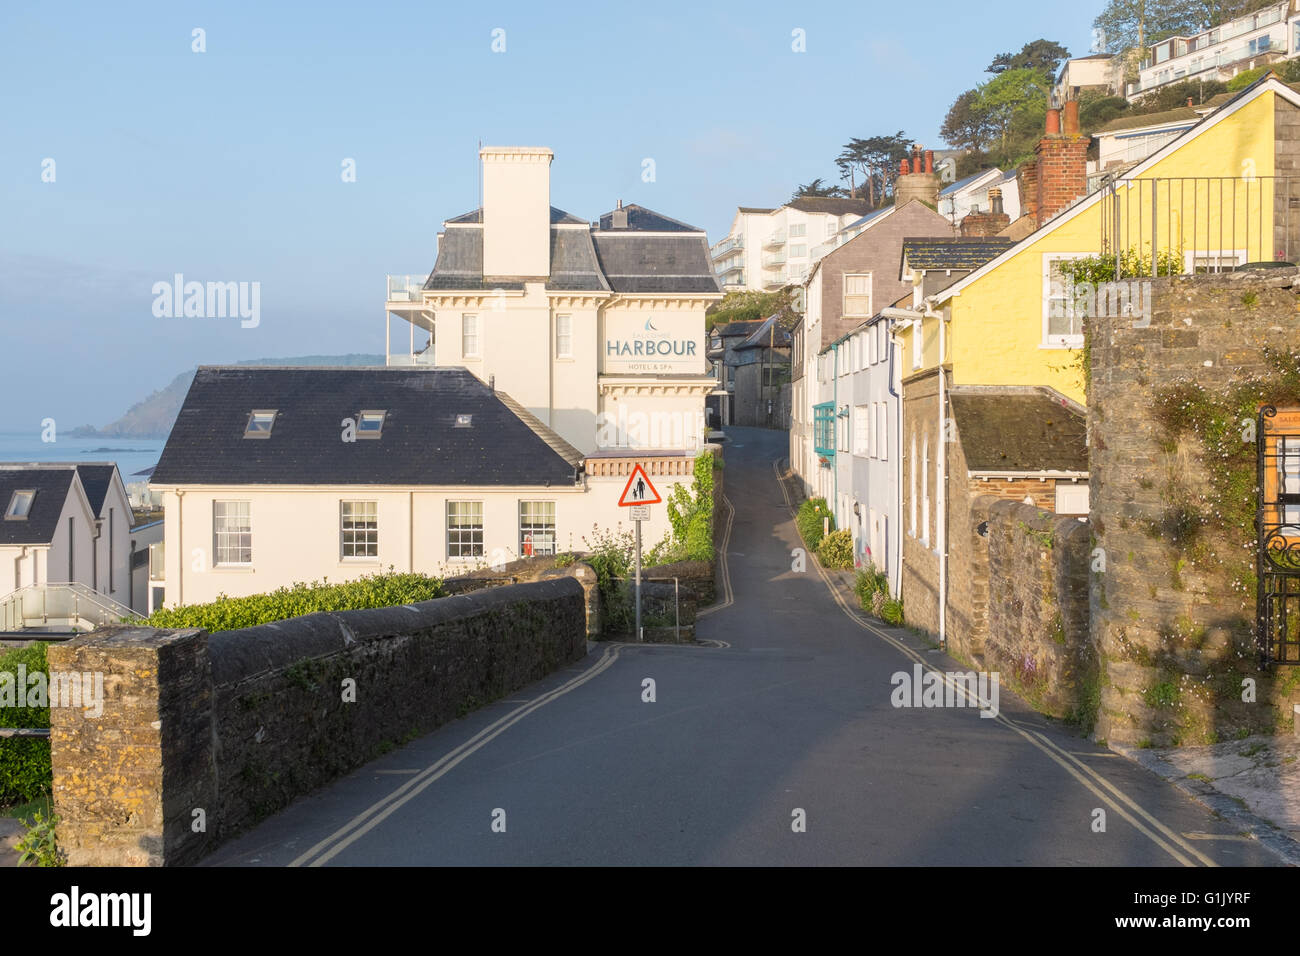 View Of Salcombe Harbour Hotel And Cottages In Fore Street